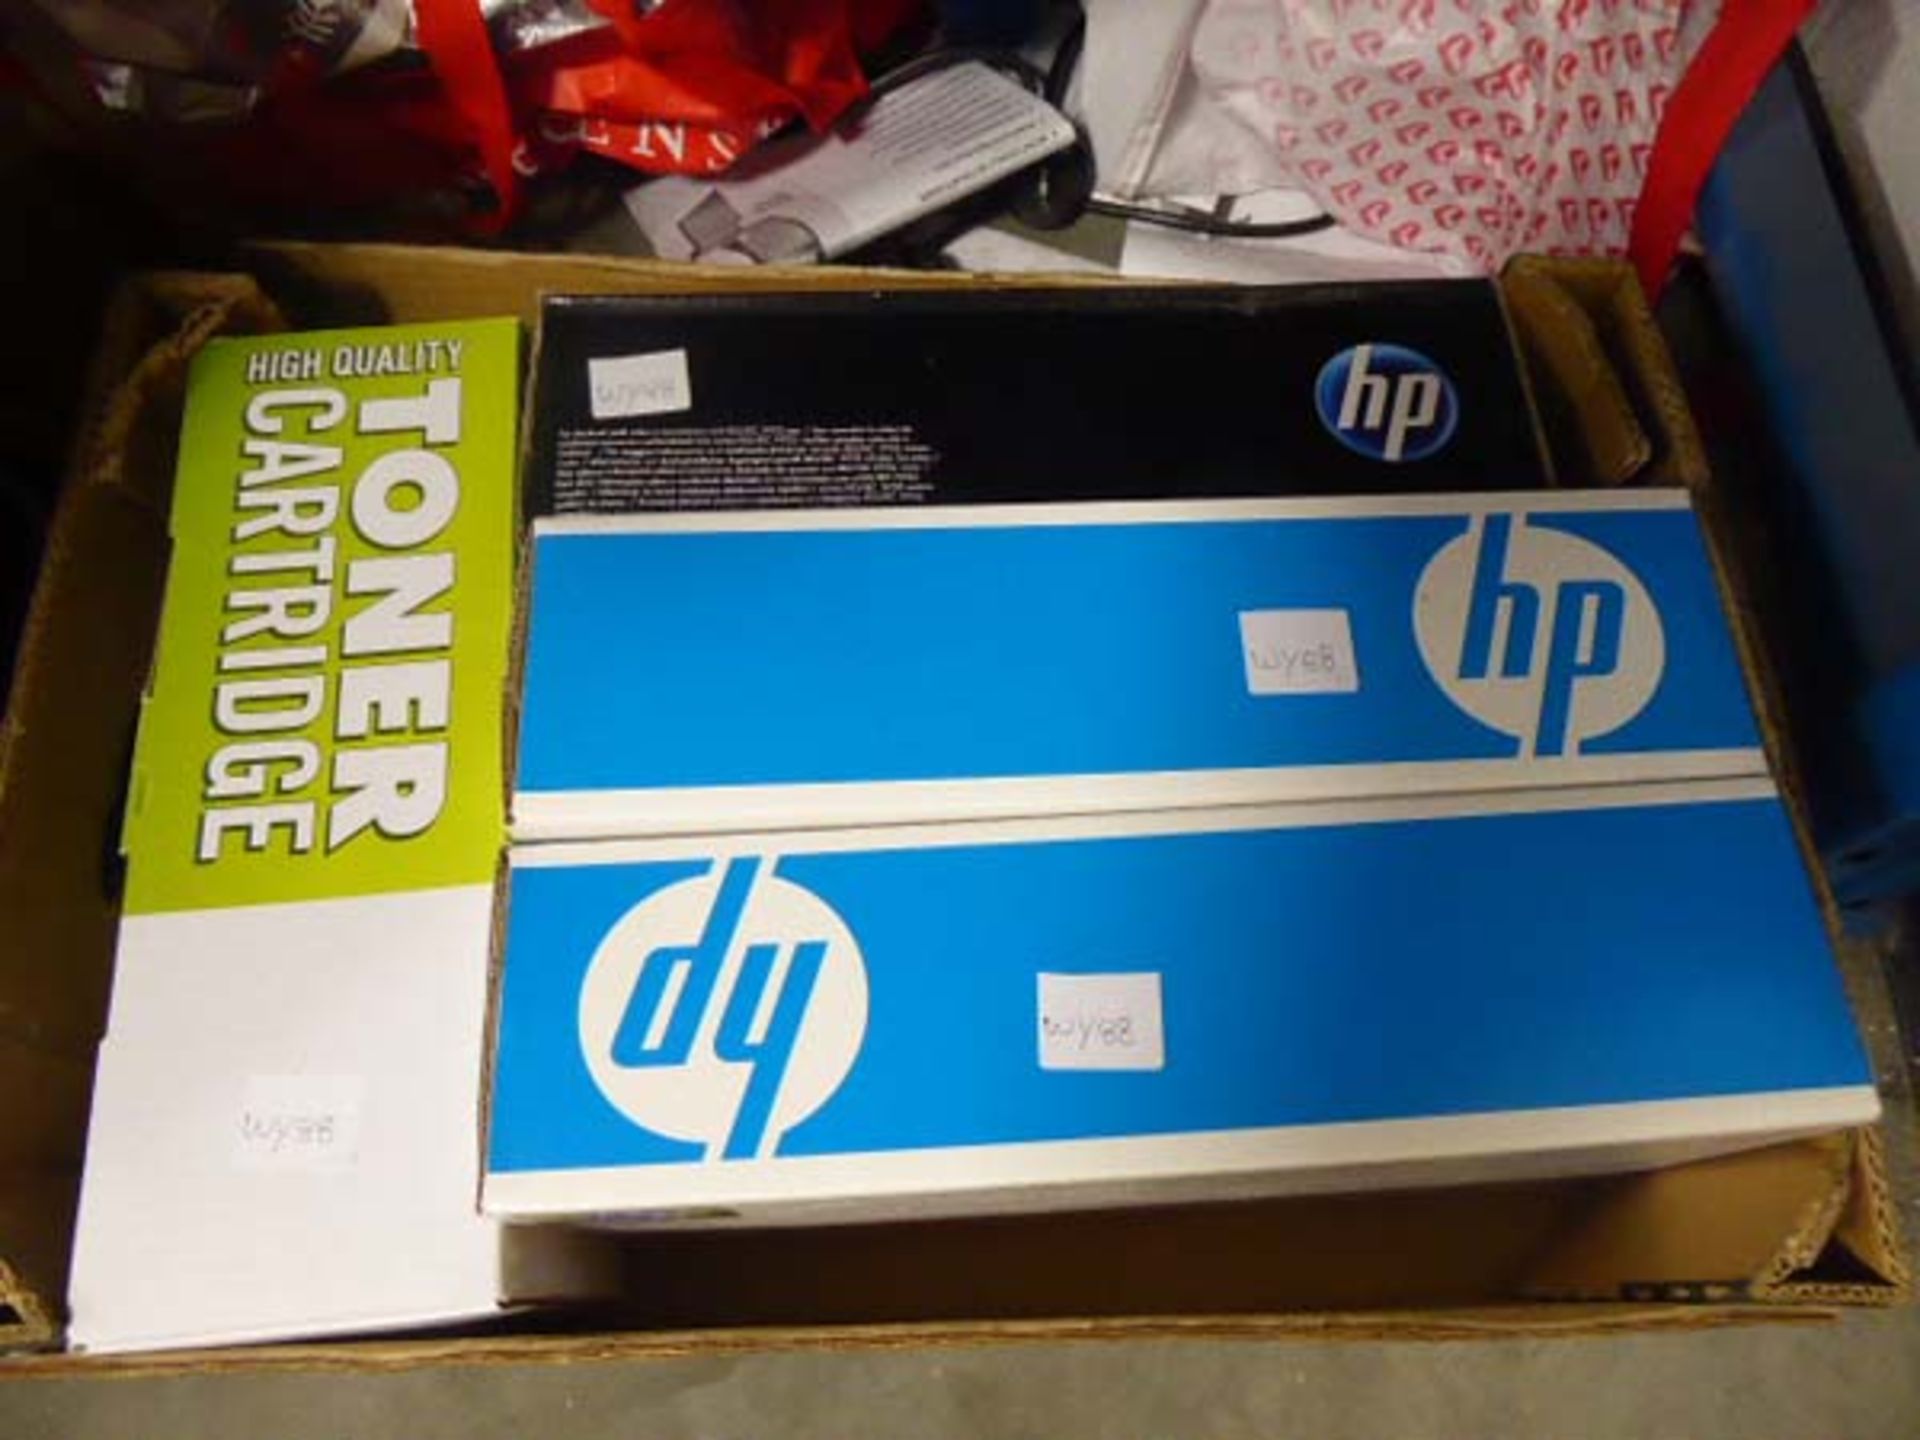 Tray containing 4 replacement toner cartridges, 3 by HP